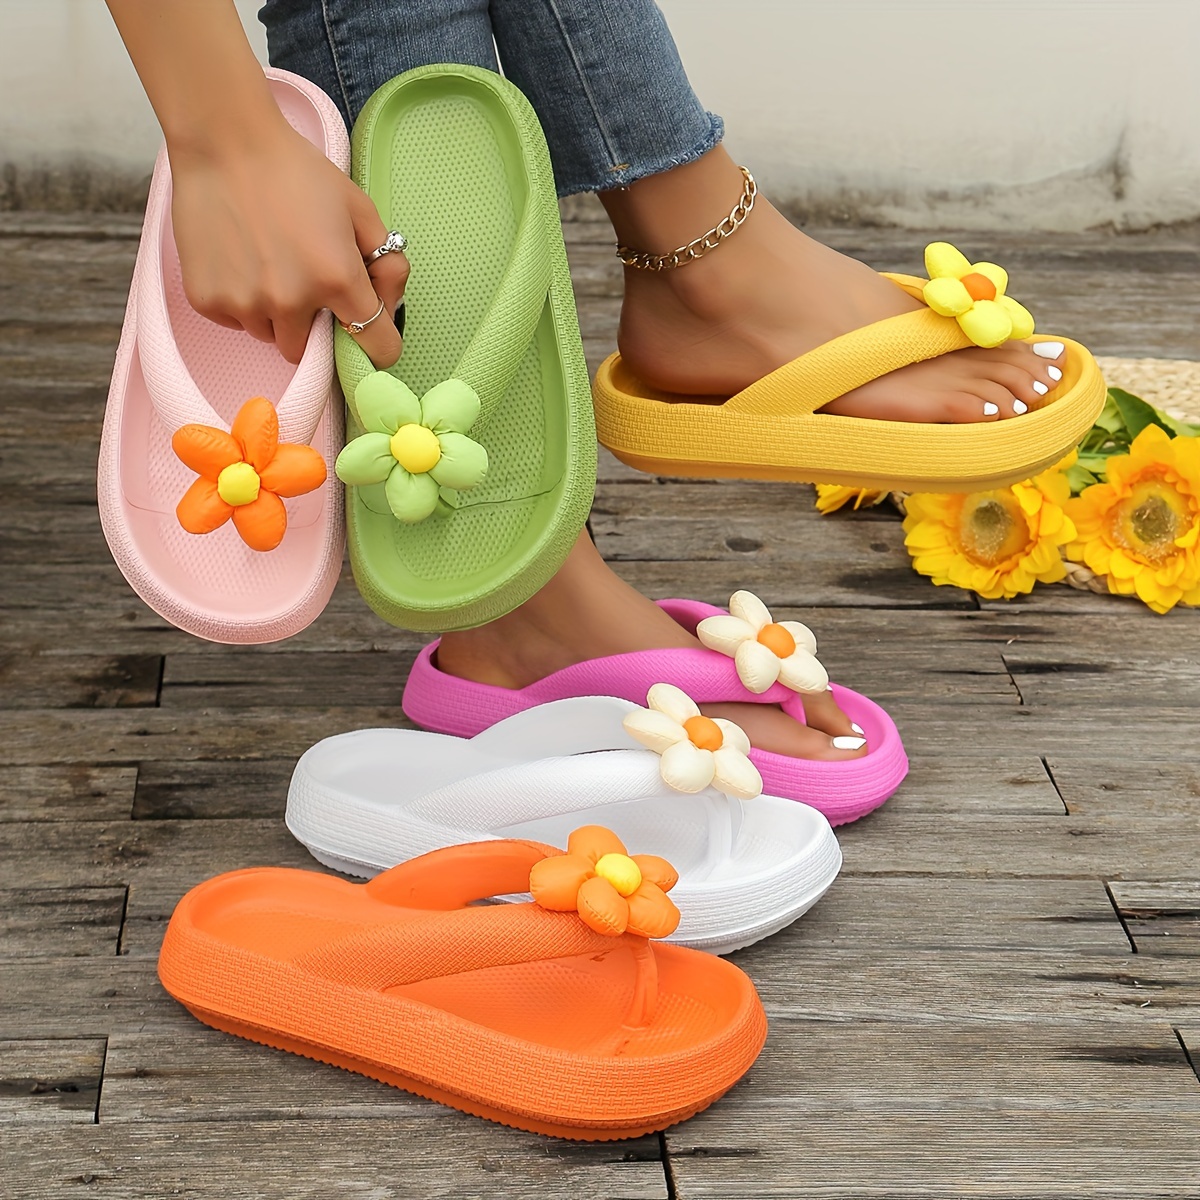 

Women's Summer Flip Flops With Sunflower, Colorful Soft Sole Thong Sandals For Travel & Vacation, Comfortable Eva Beach Slides